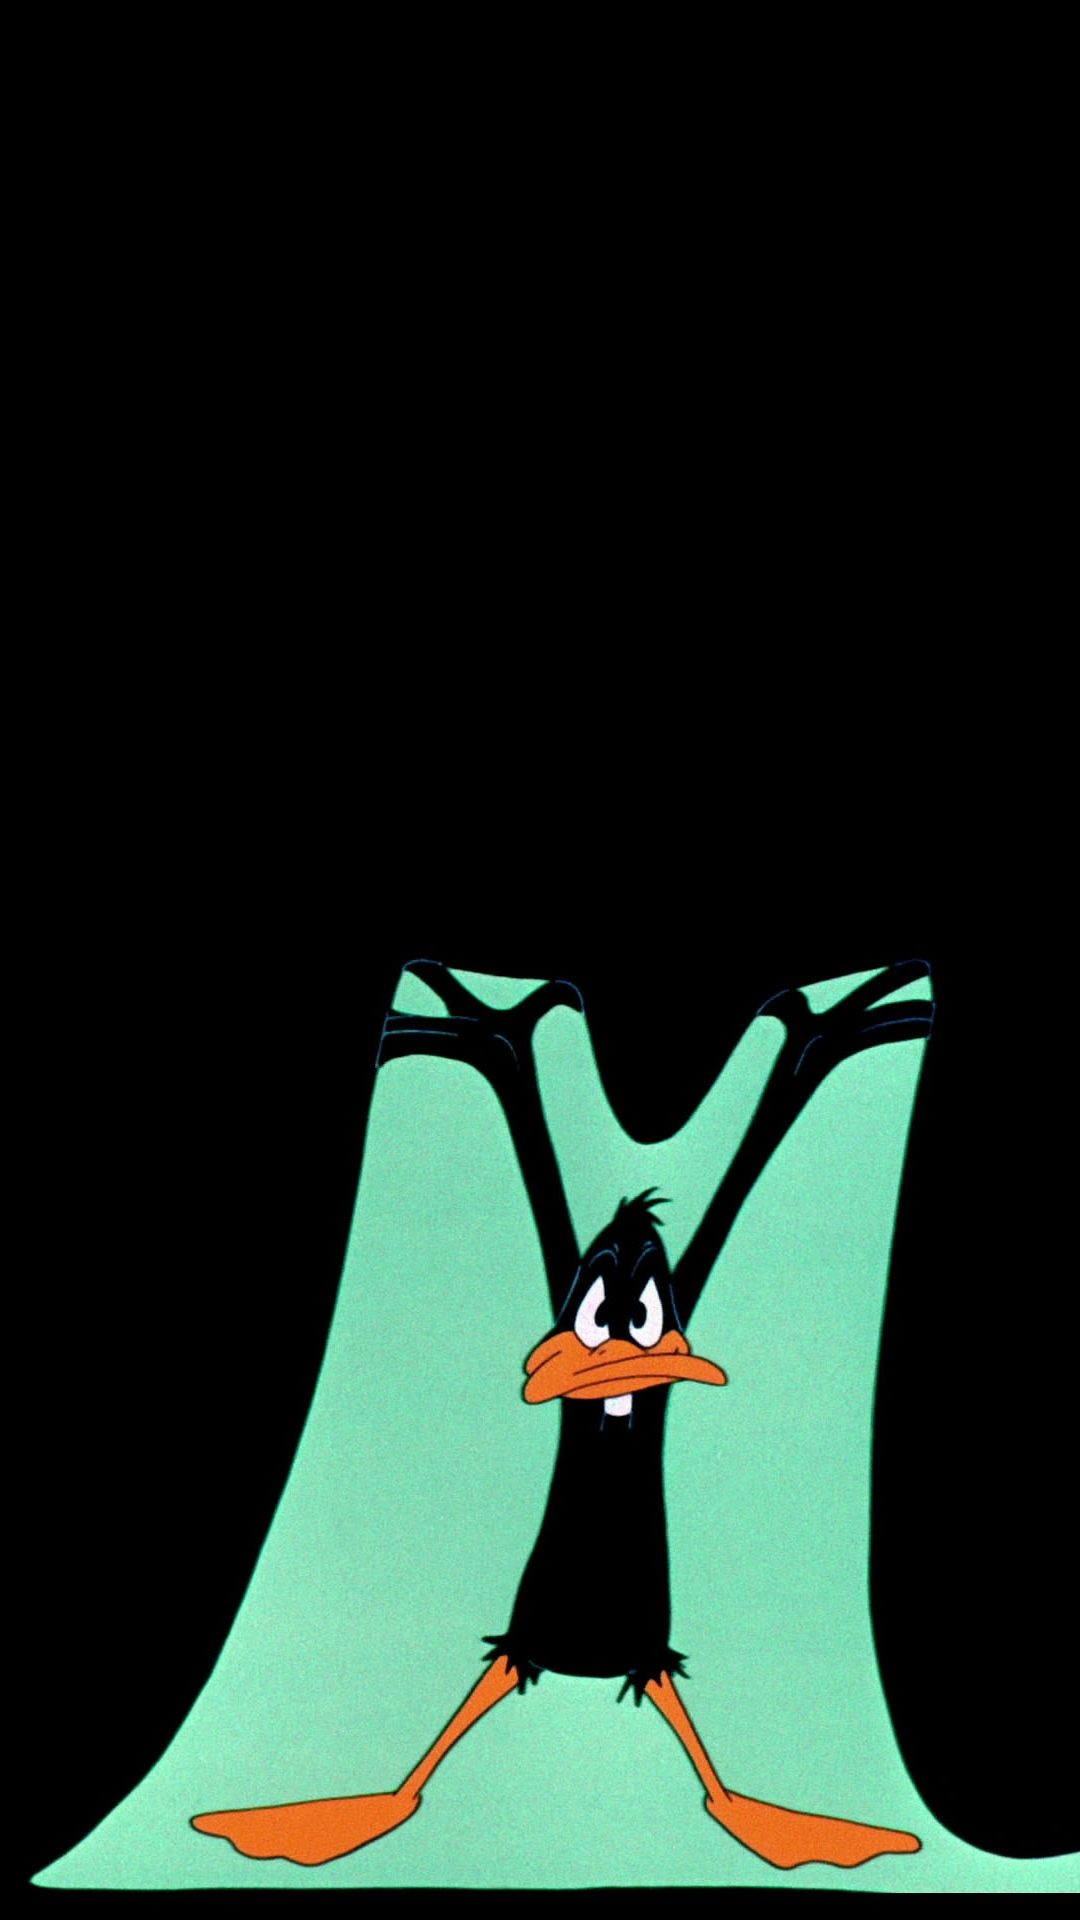 Looney Toons, Vibrant phone wallpapers, Toons in HD, Playful backgrounds, 1080x1920 Full HD Handy